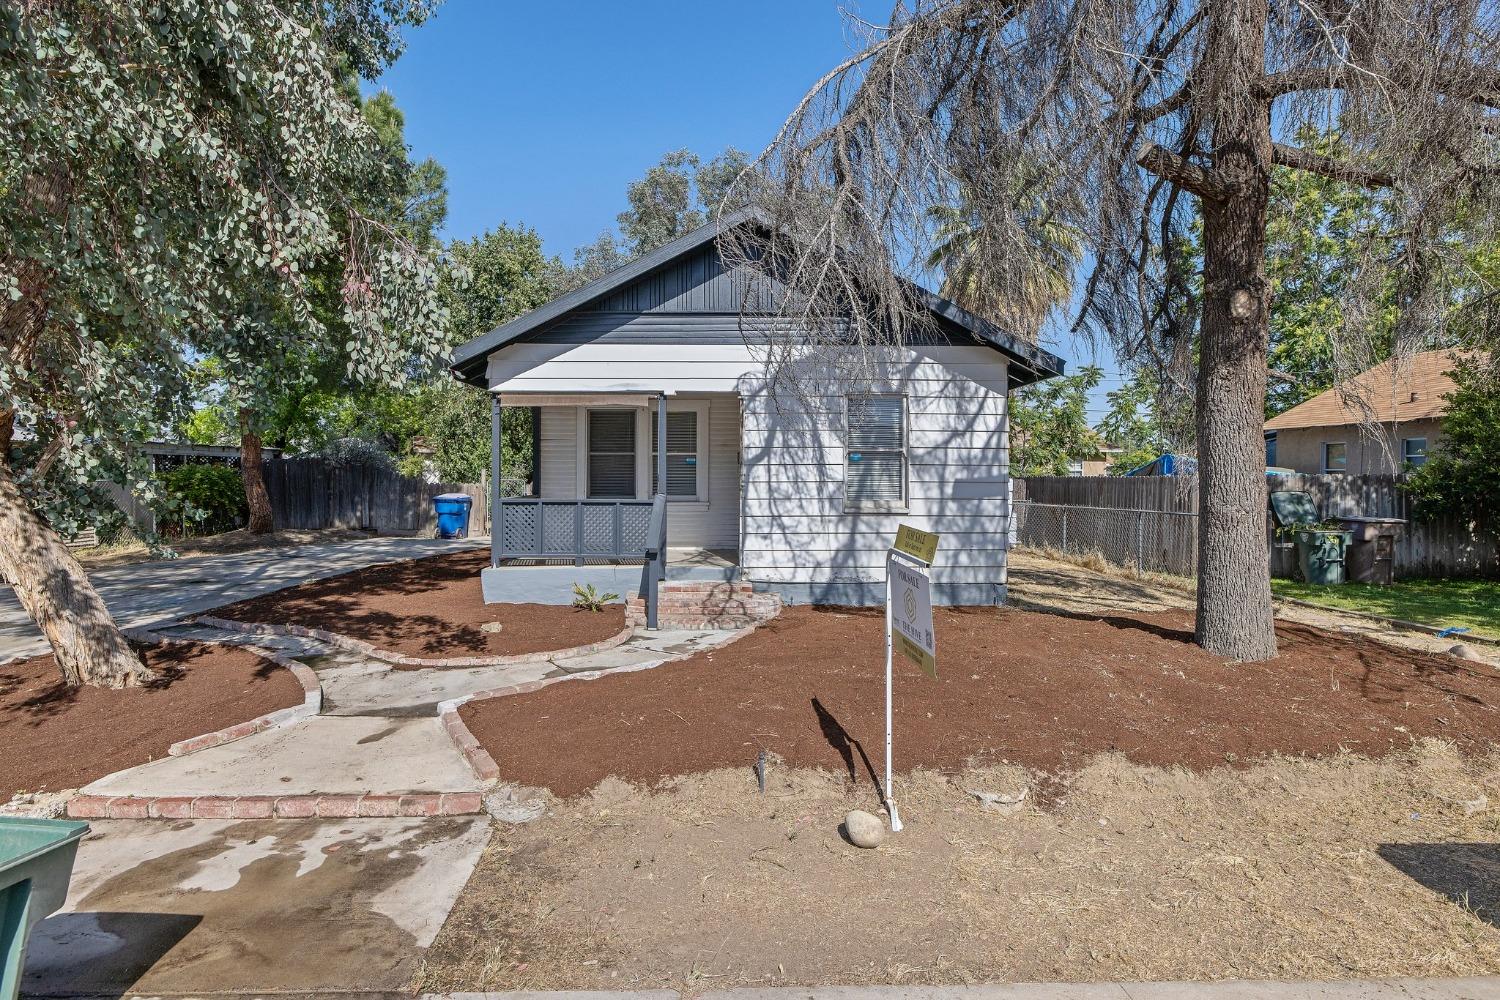 Photo of 630 Olive St in Bakersfield, CA